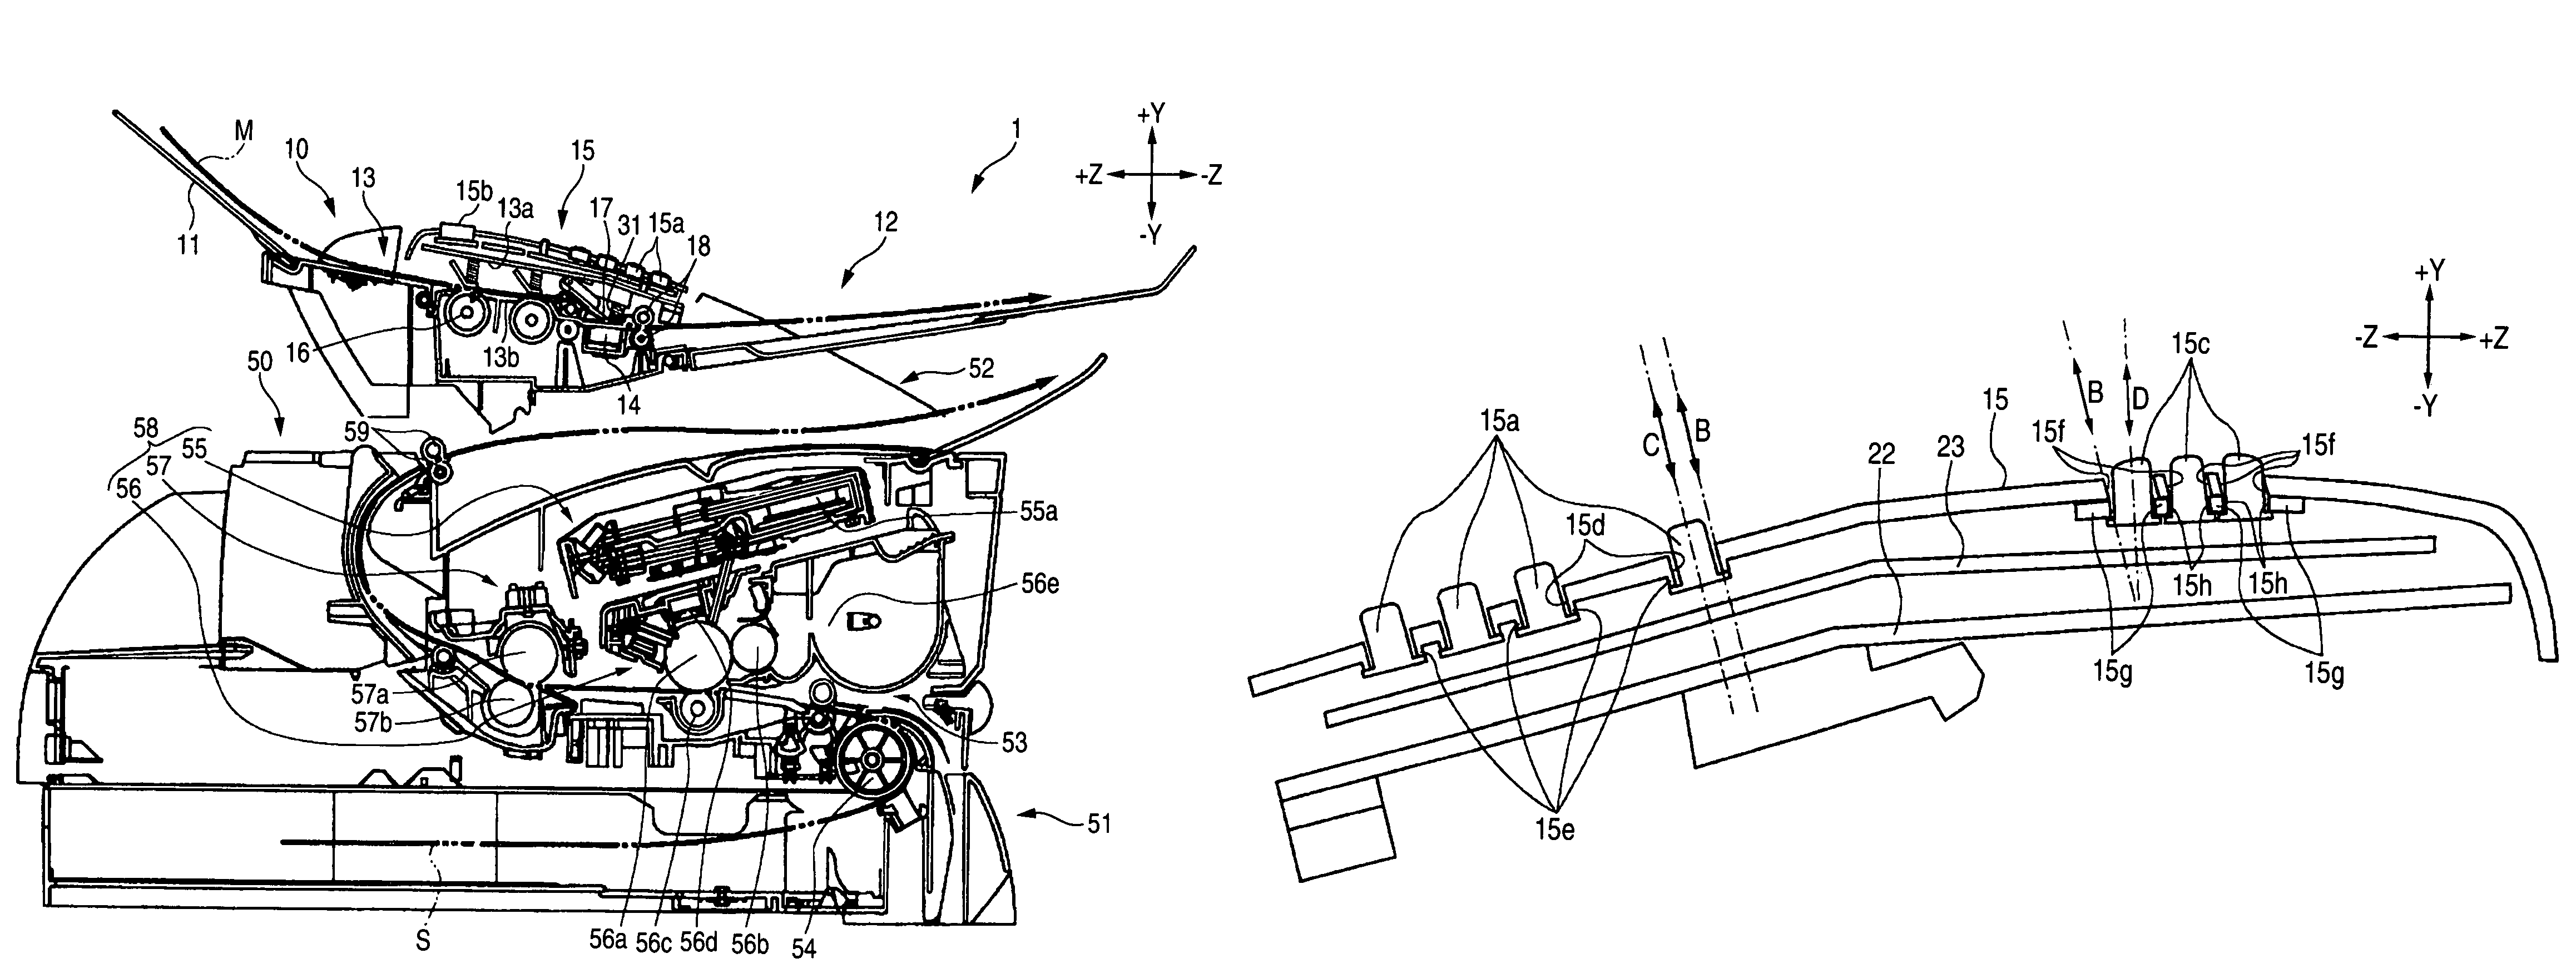 Image reading apparatus and multi-functional apparatus having a plate-like pressing member